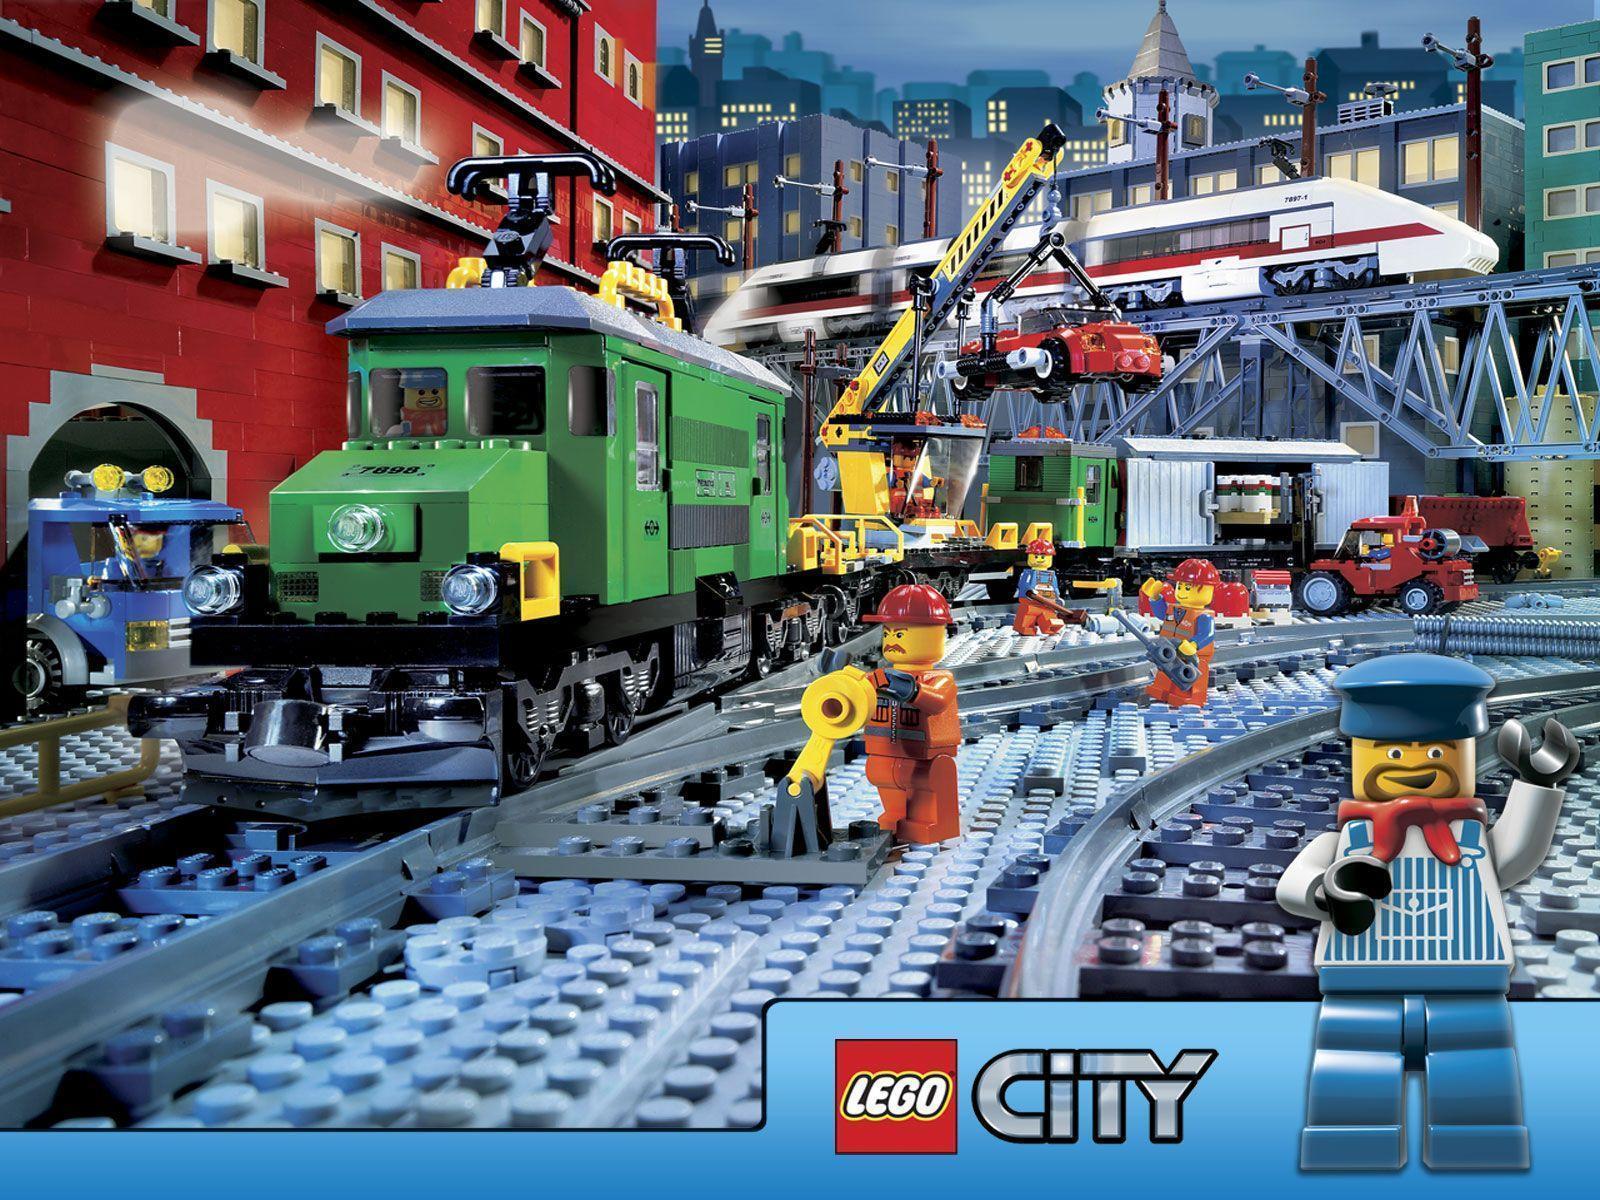 LEGO City Picture. Lego City Wallpaper. christmas gift